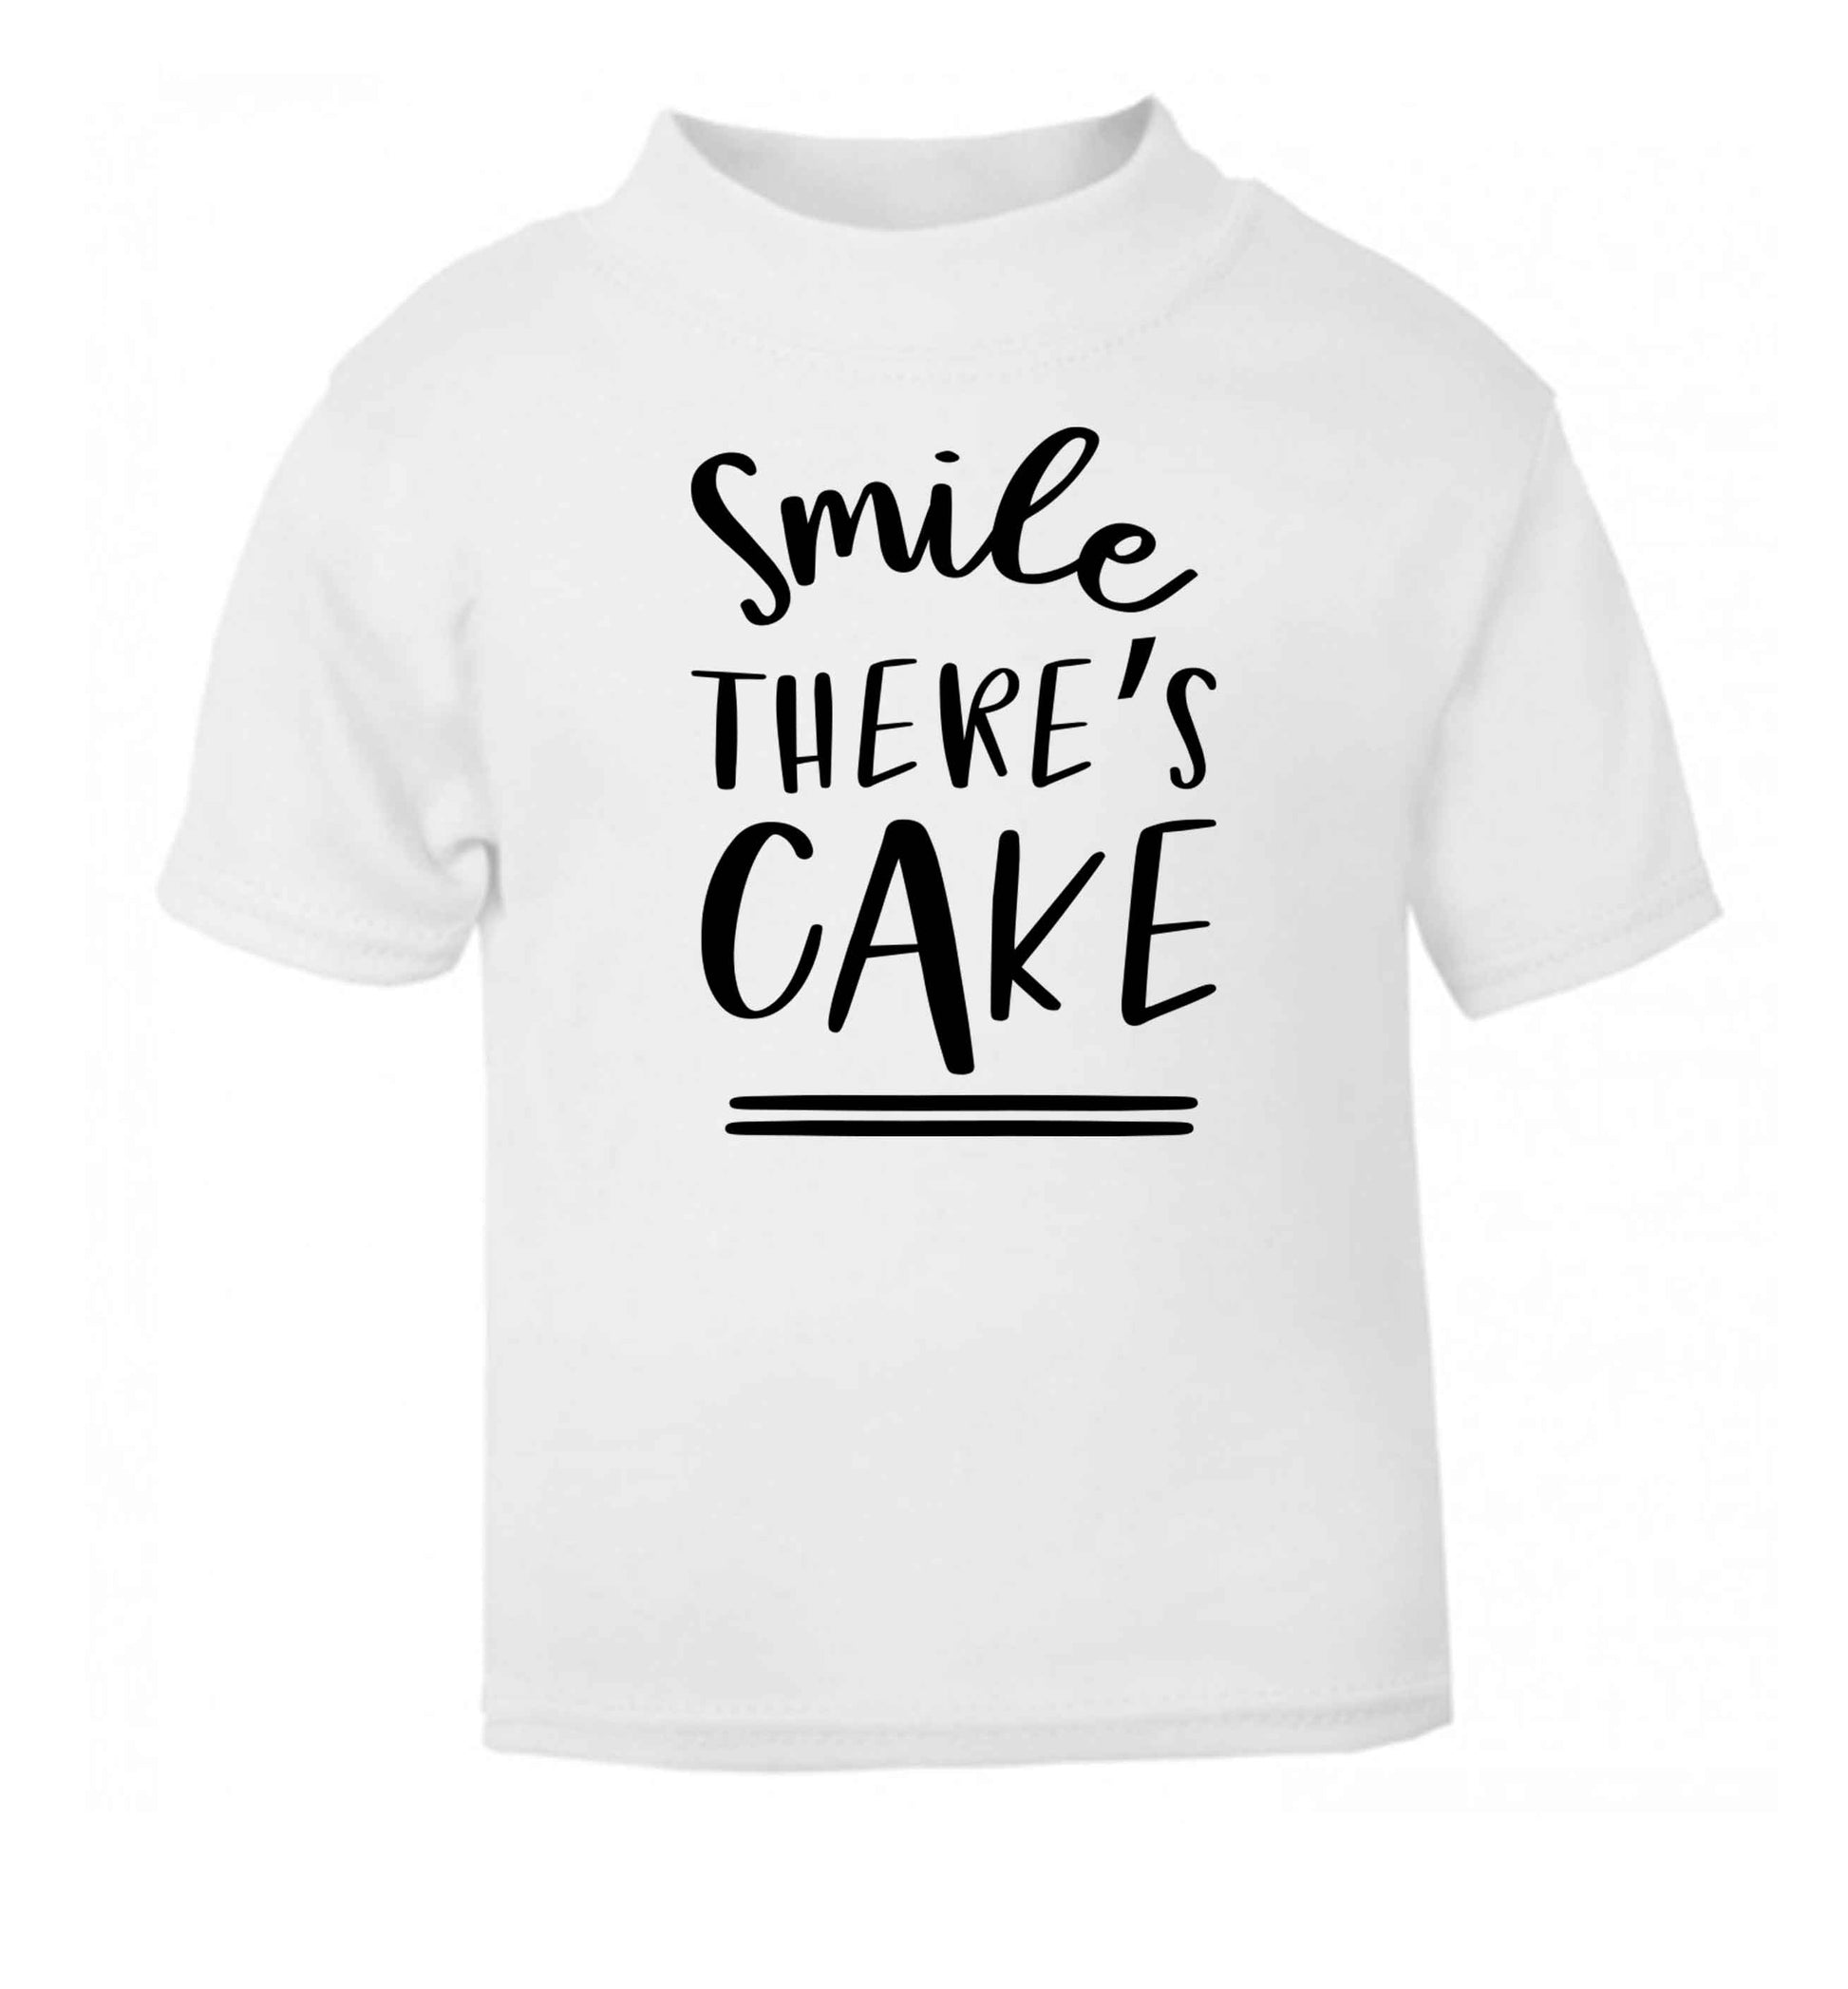 Smile there's cake white Baby Toddler Tshirt 2 Years